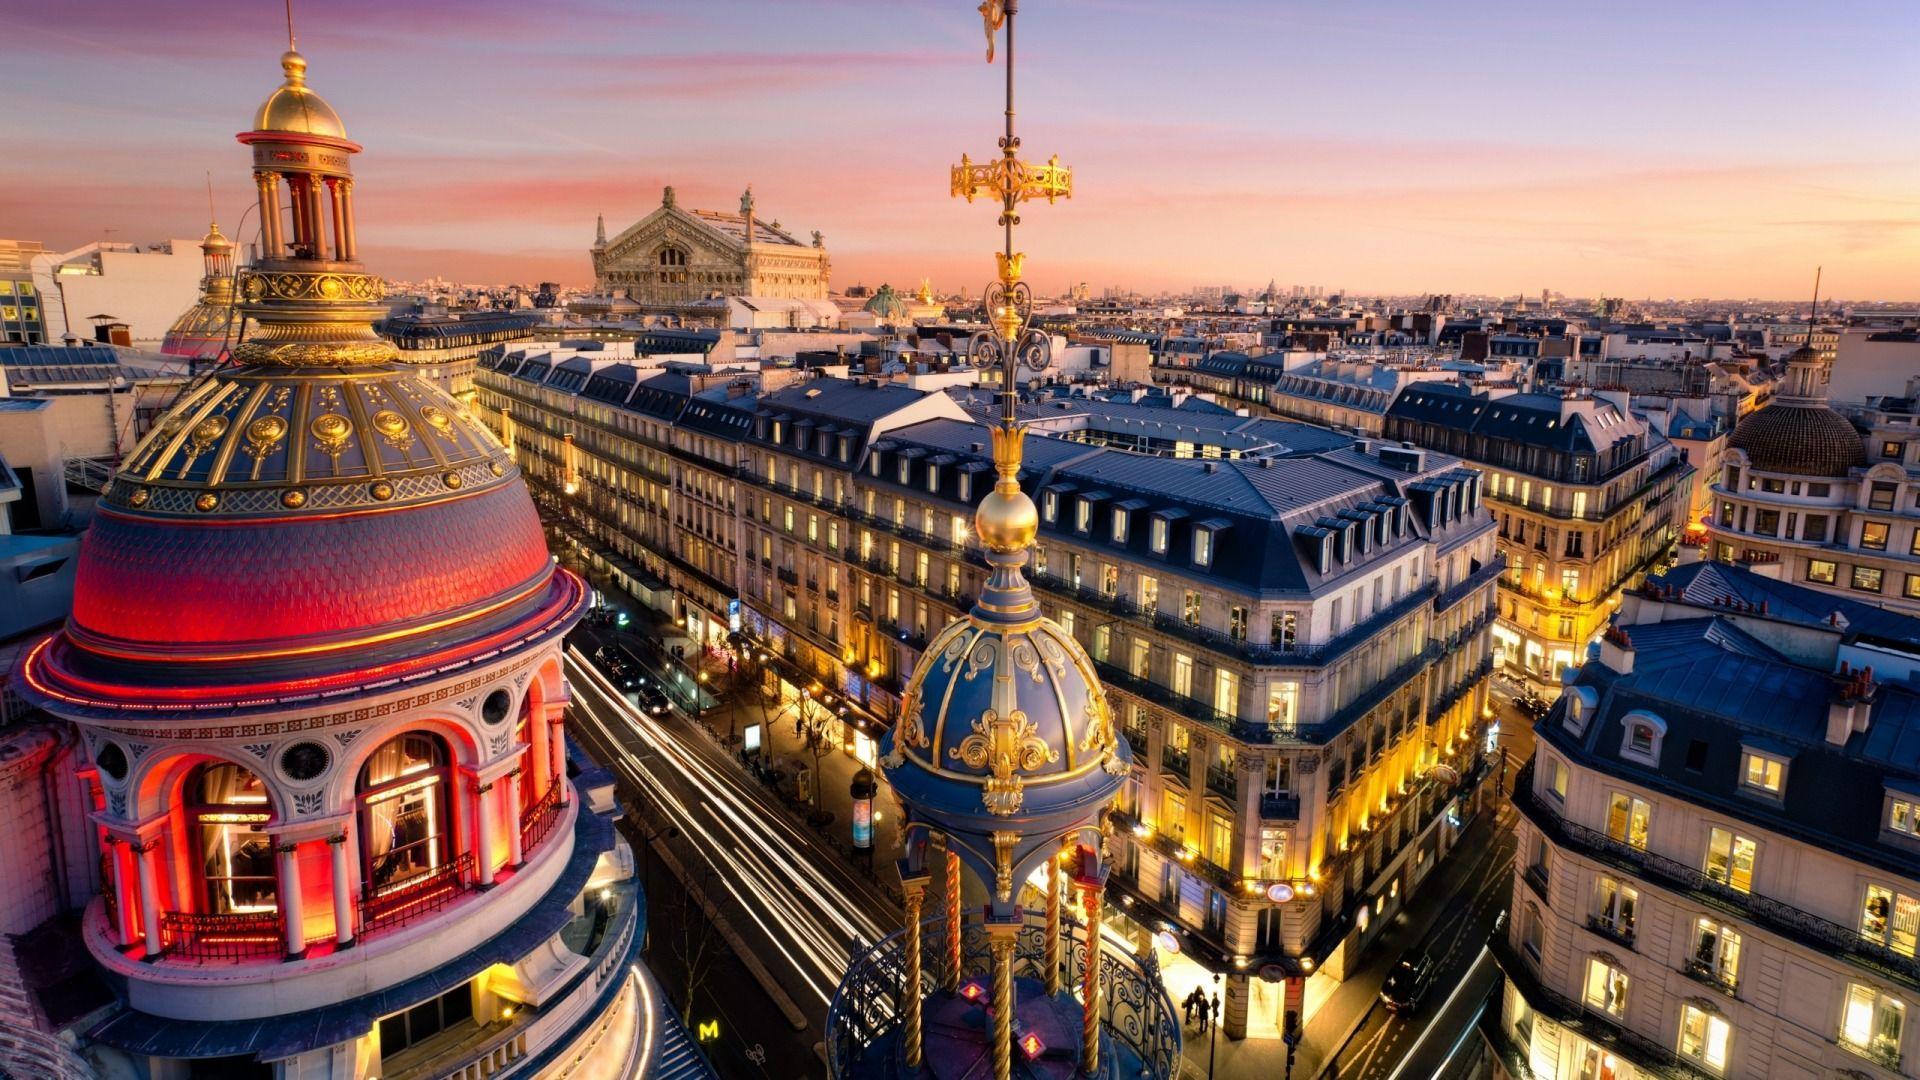 The City Of Lights Has Always Been Connected To Luxury Lifestyle And